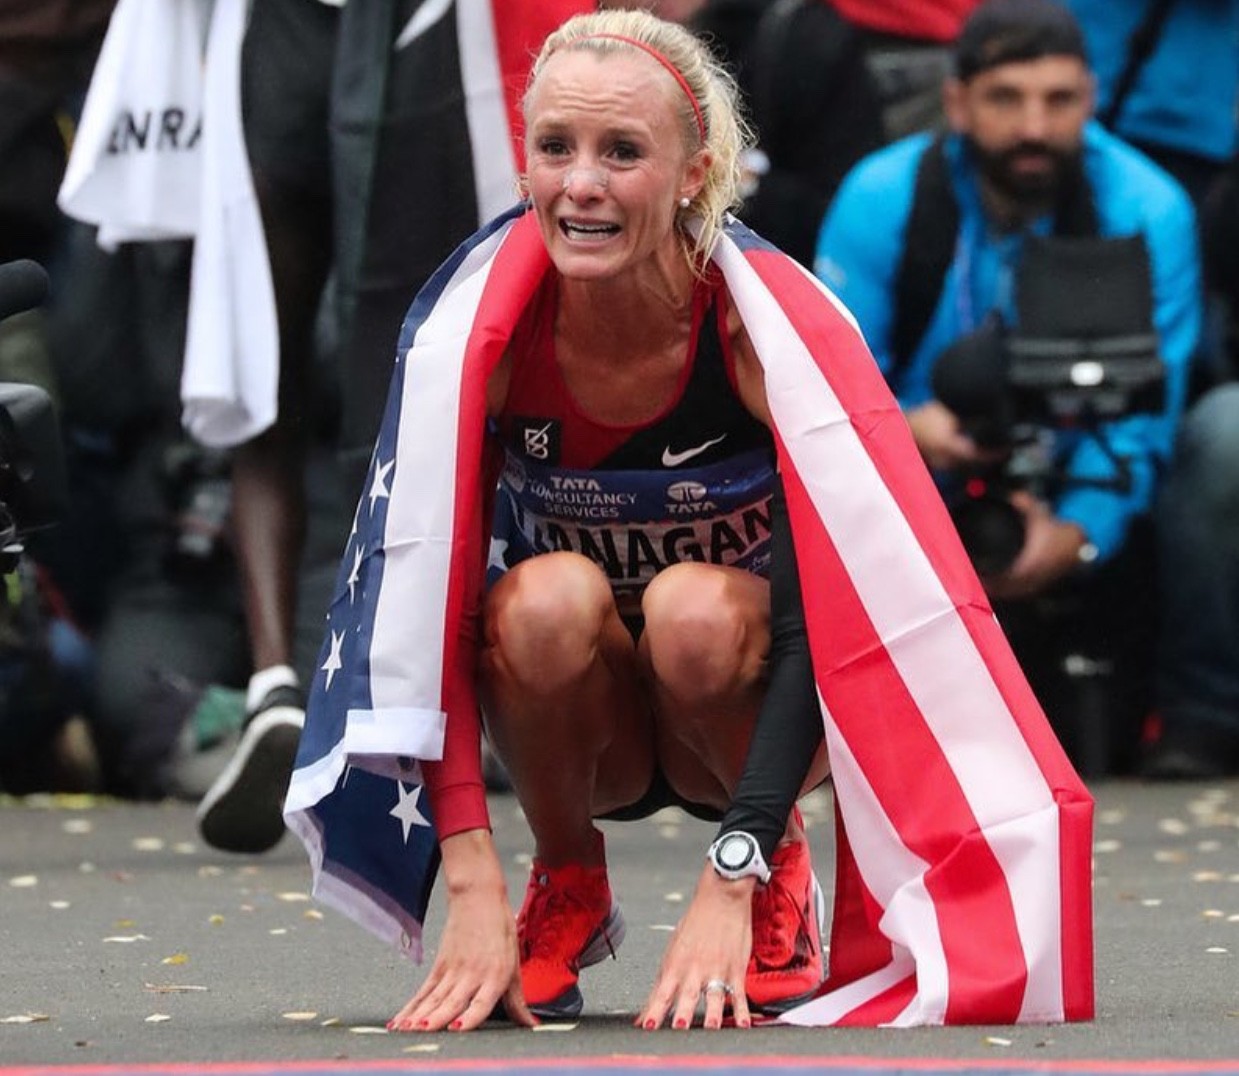 Shalane Flanagan Has To Be The Most Admired Runner Of 2017